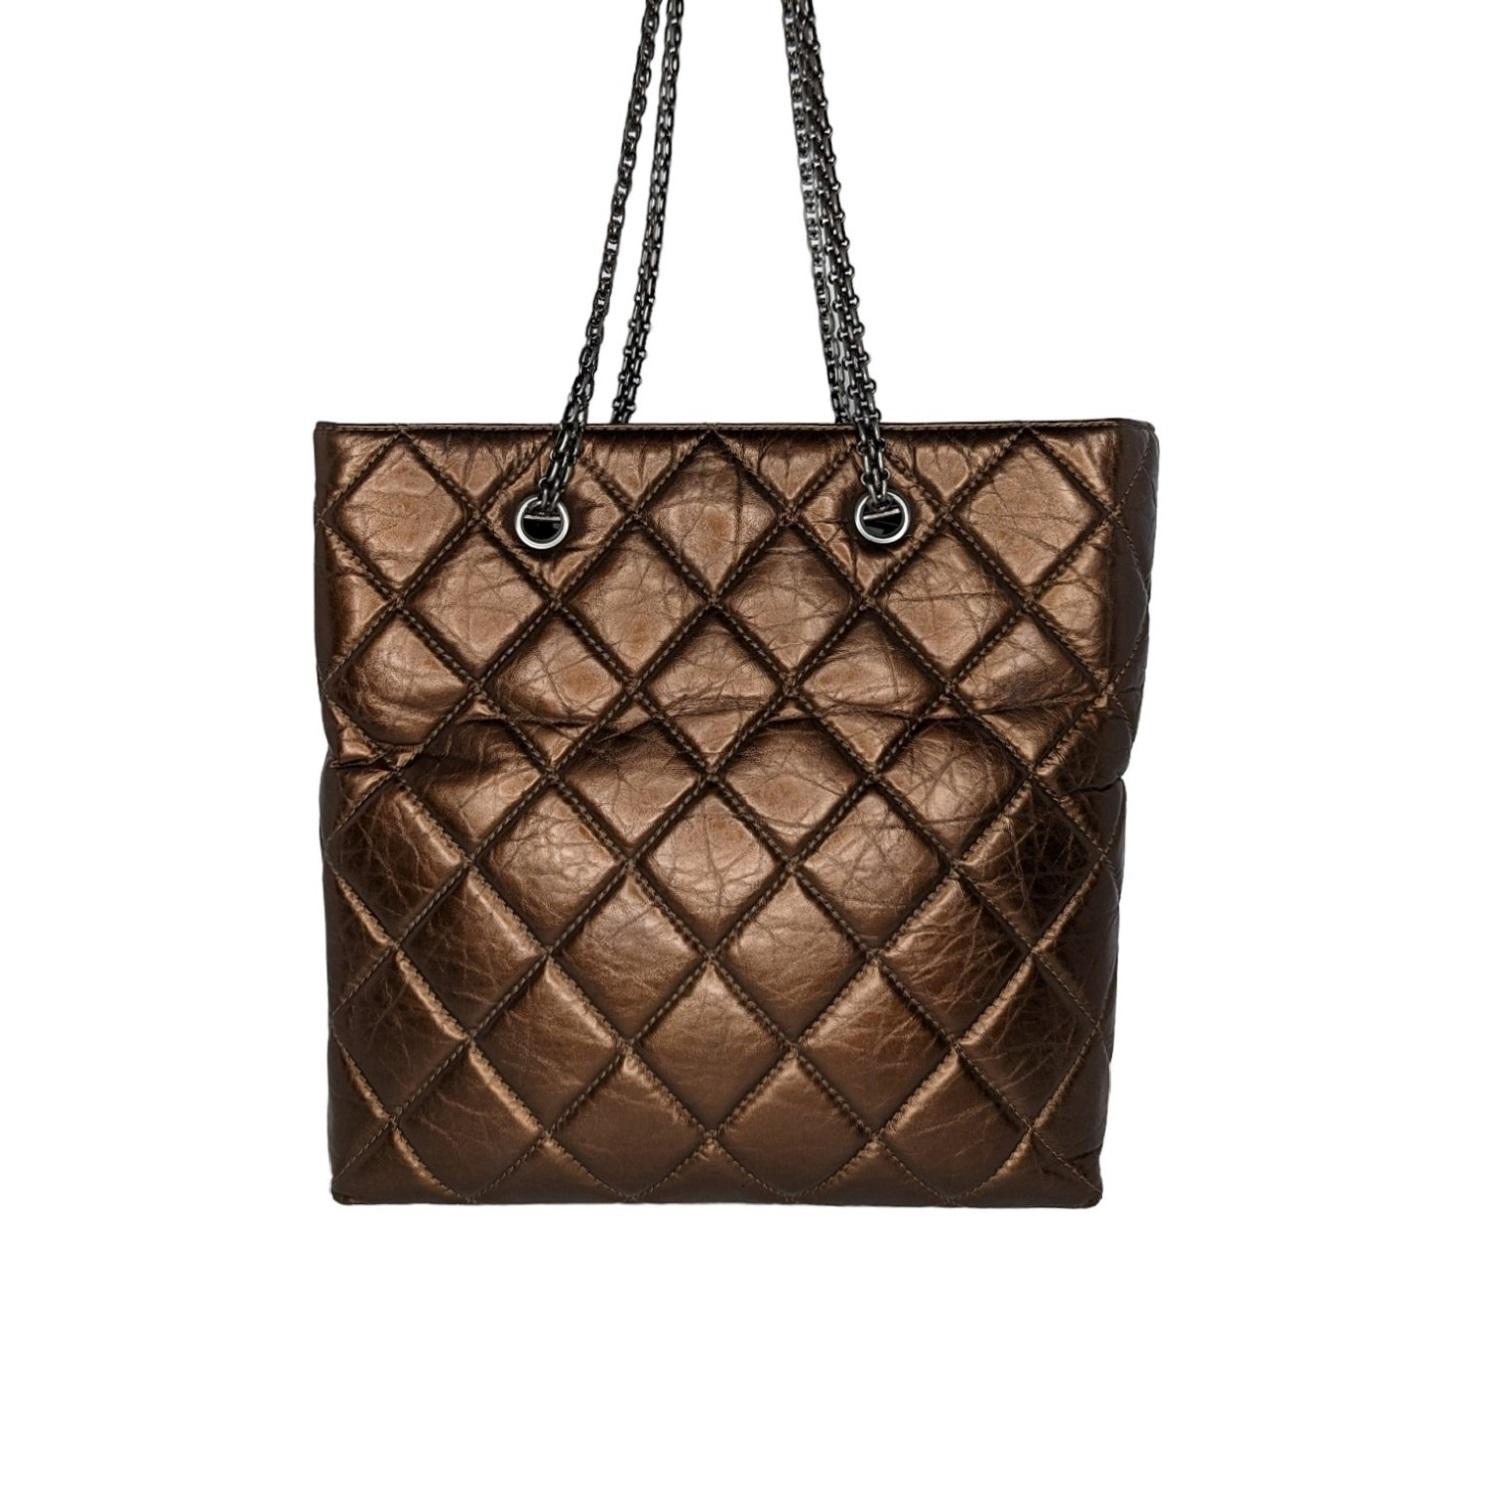 This exquisite tote is beautifully crafted of diamond quilted distressed aged calfskin leather in metallic bronze. The bag features bijoux ruthenium tightly linked chain shoulder straps and a ruthenium squared mademoiselle turn-lock. This opens to a